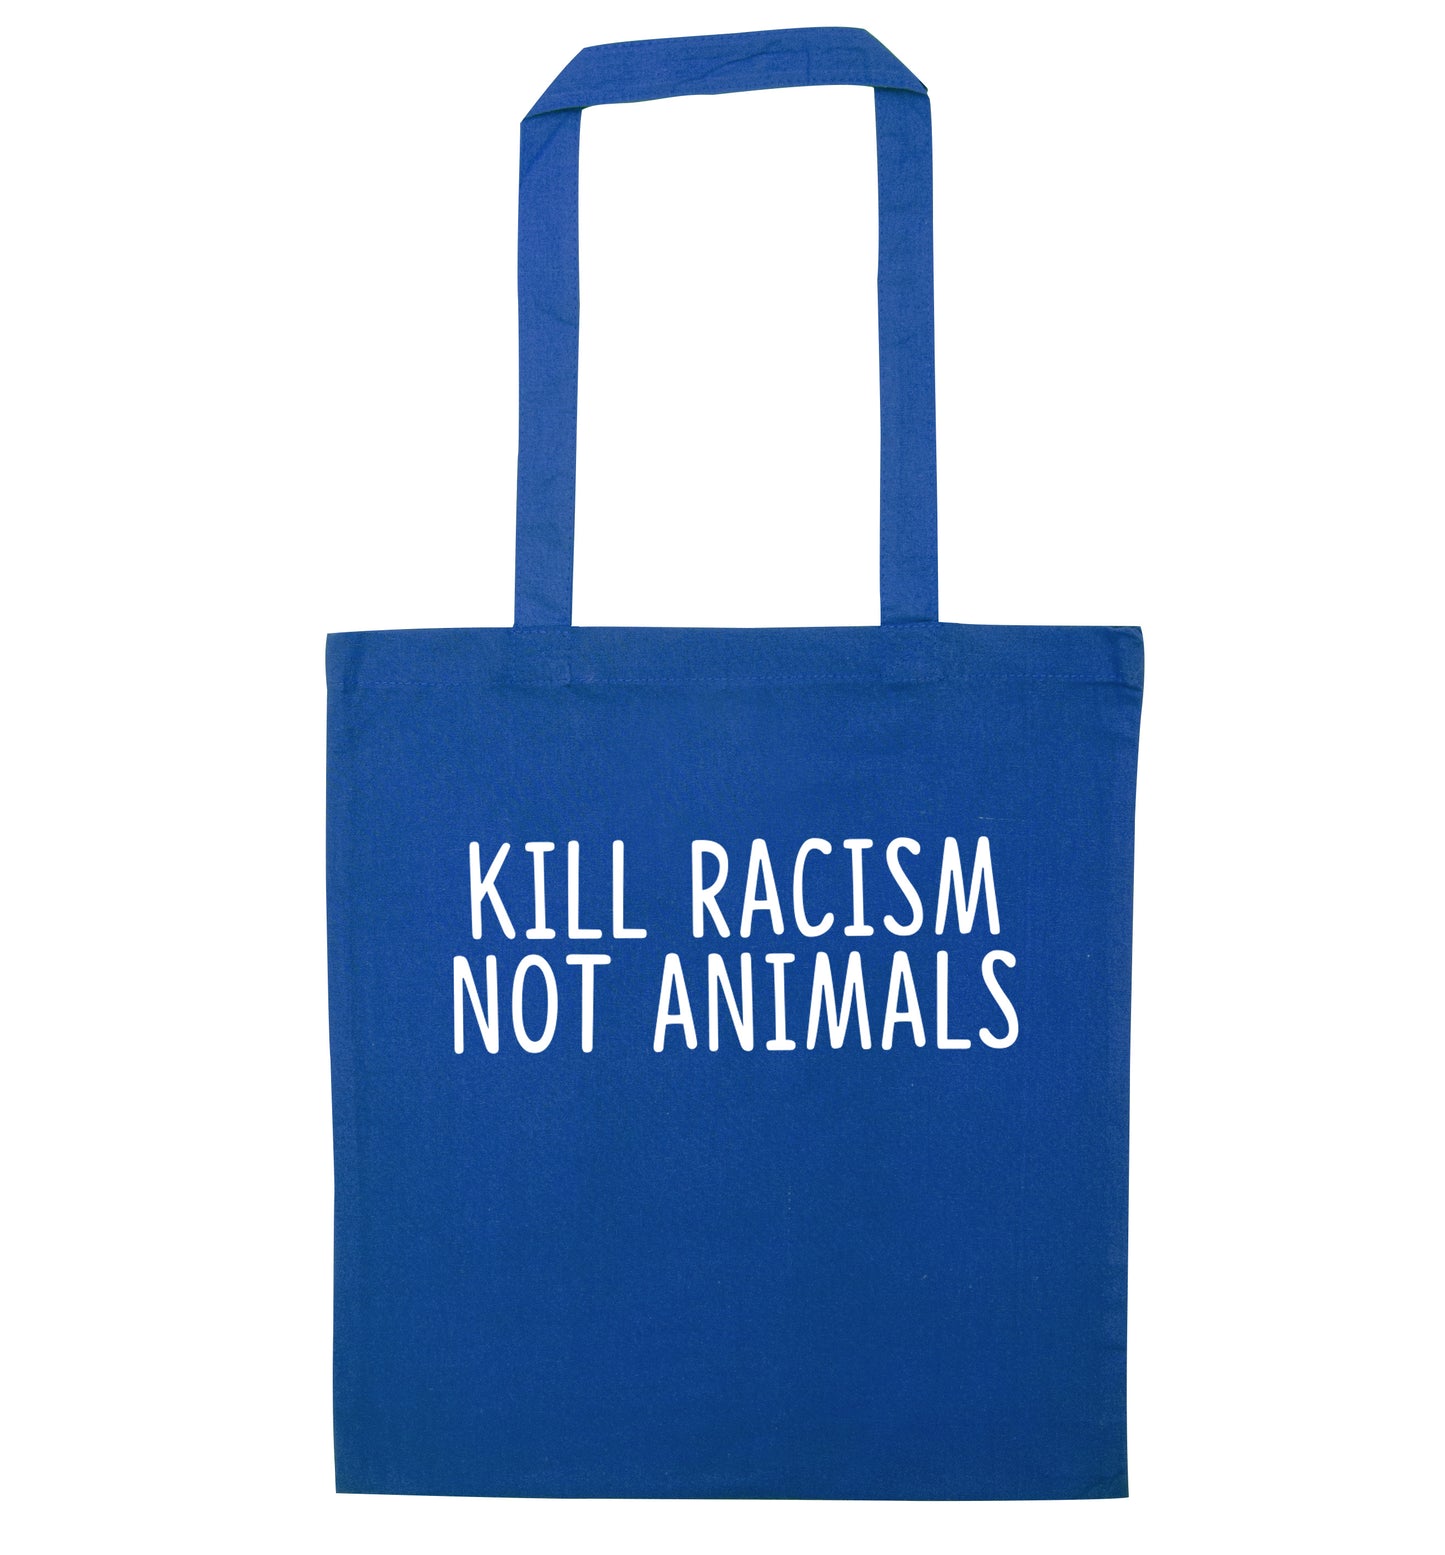 Kill Racism Not Animals blue tote bag